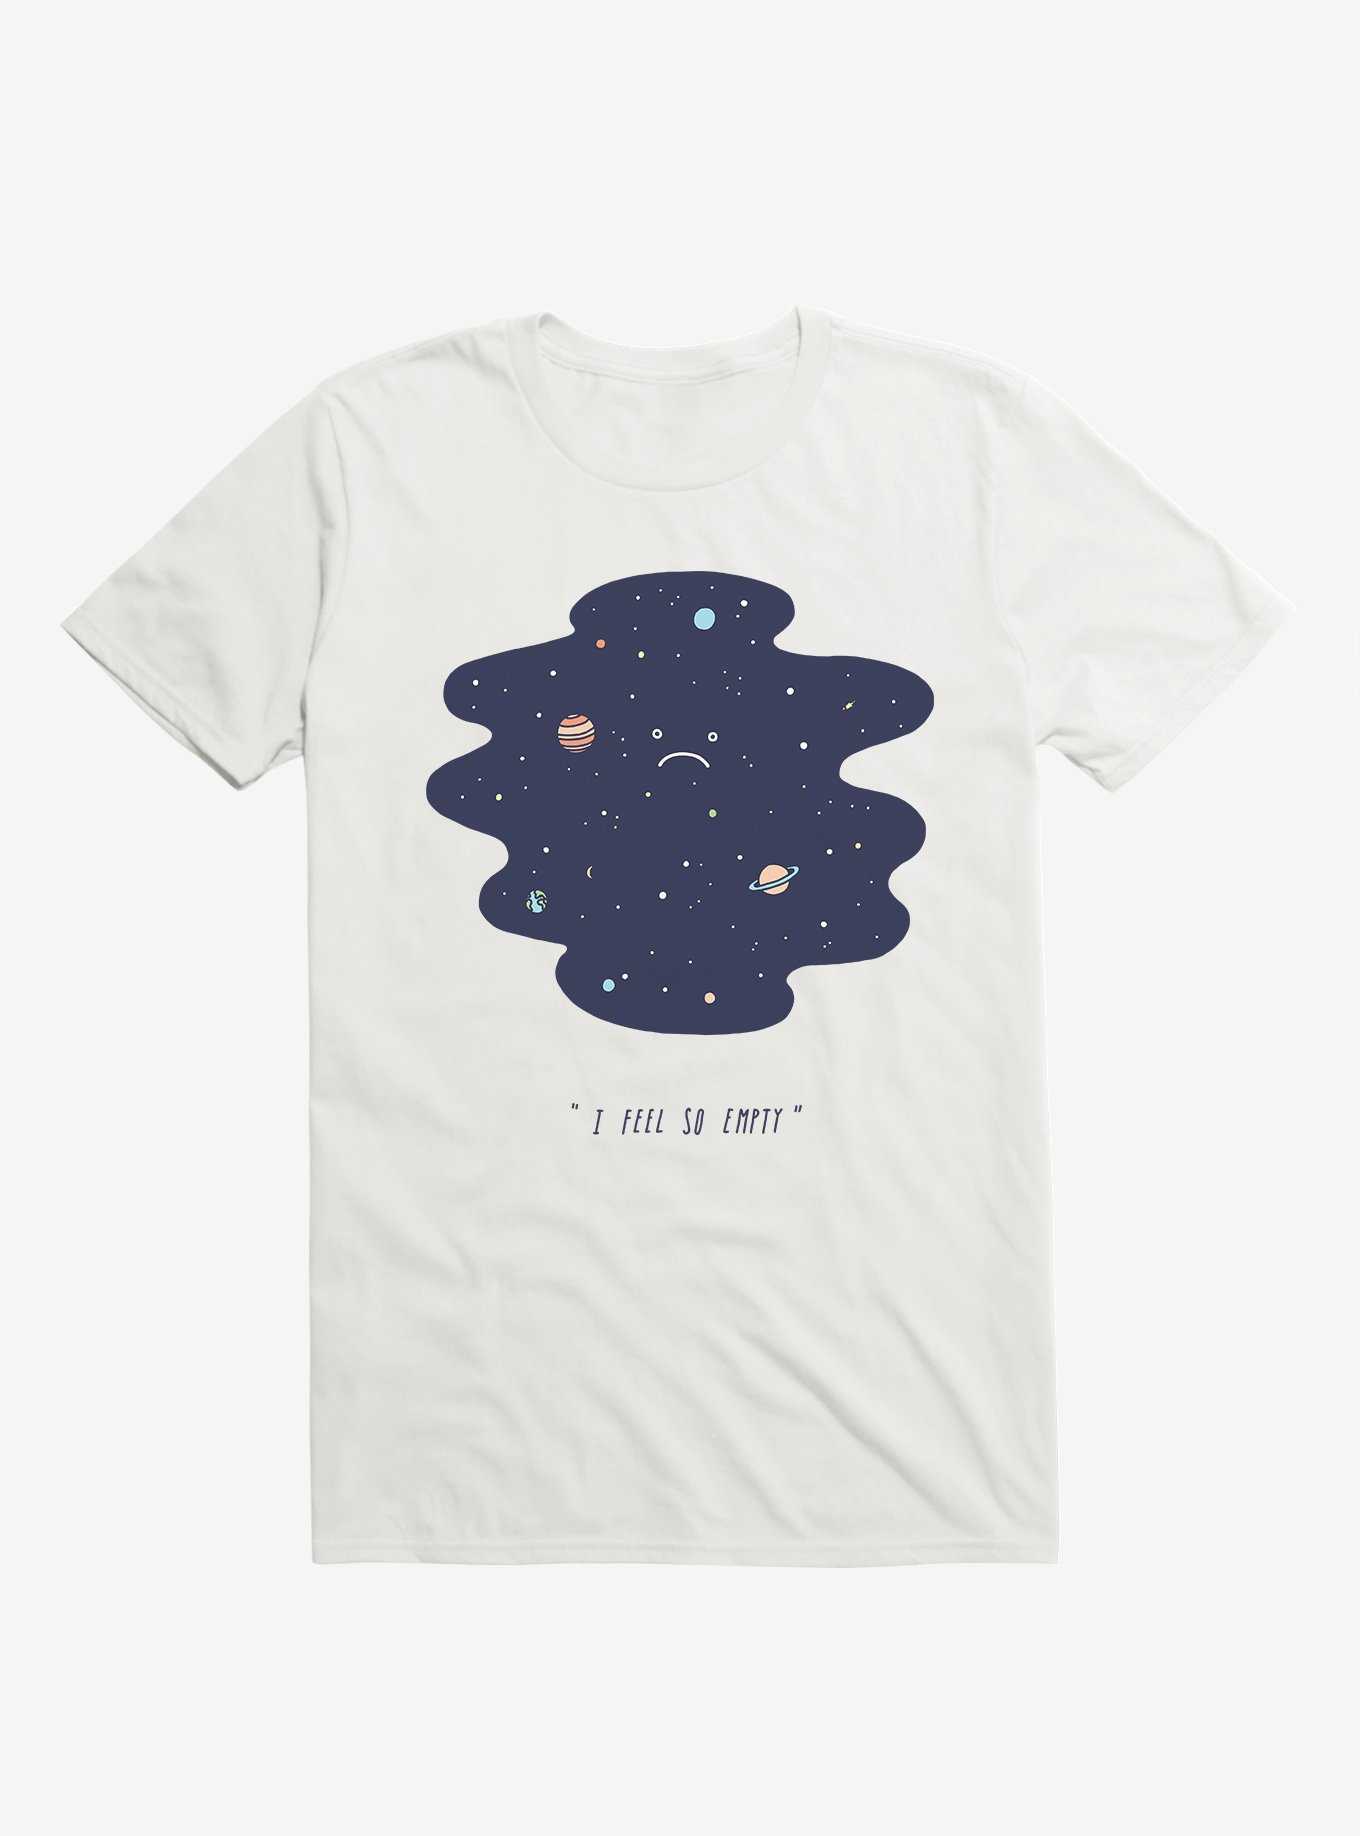 Be Different Negative Space Designed T-Shirt